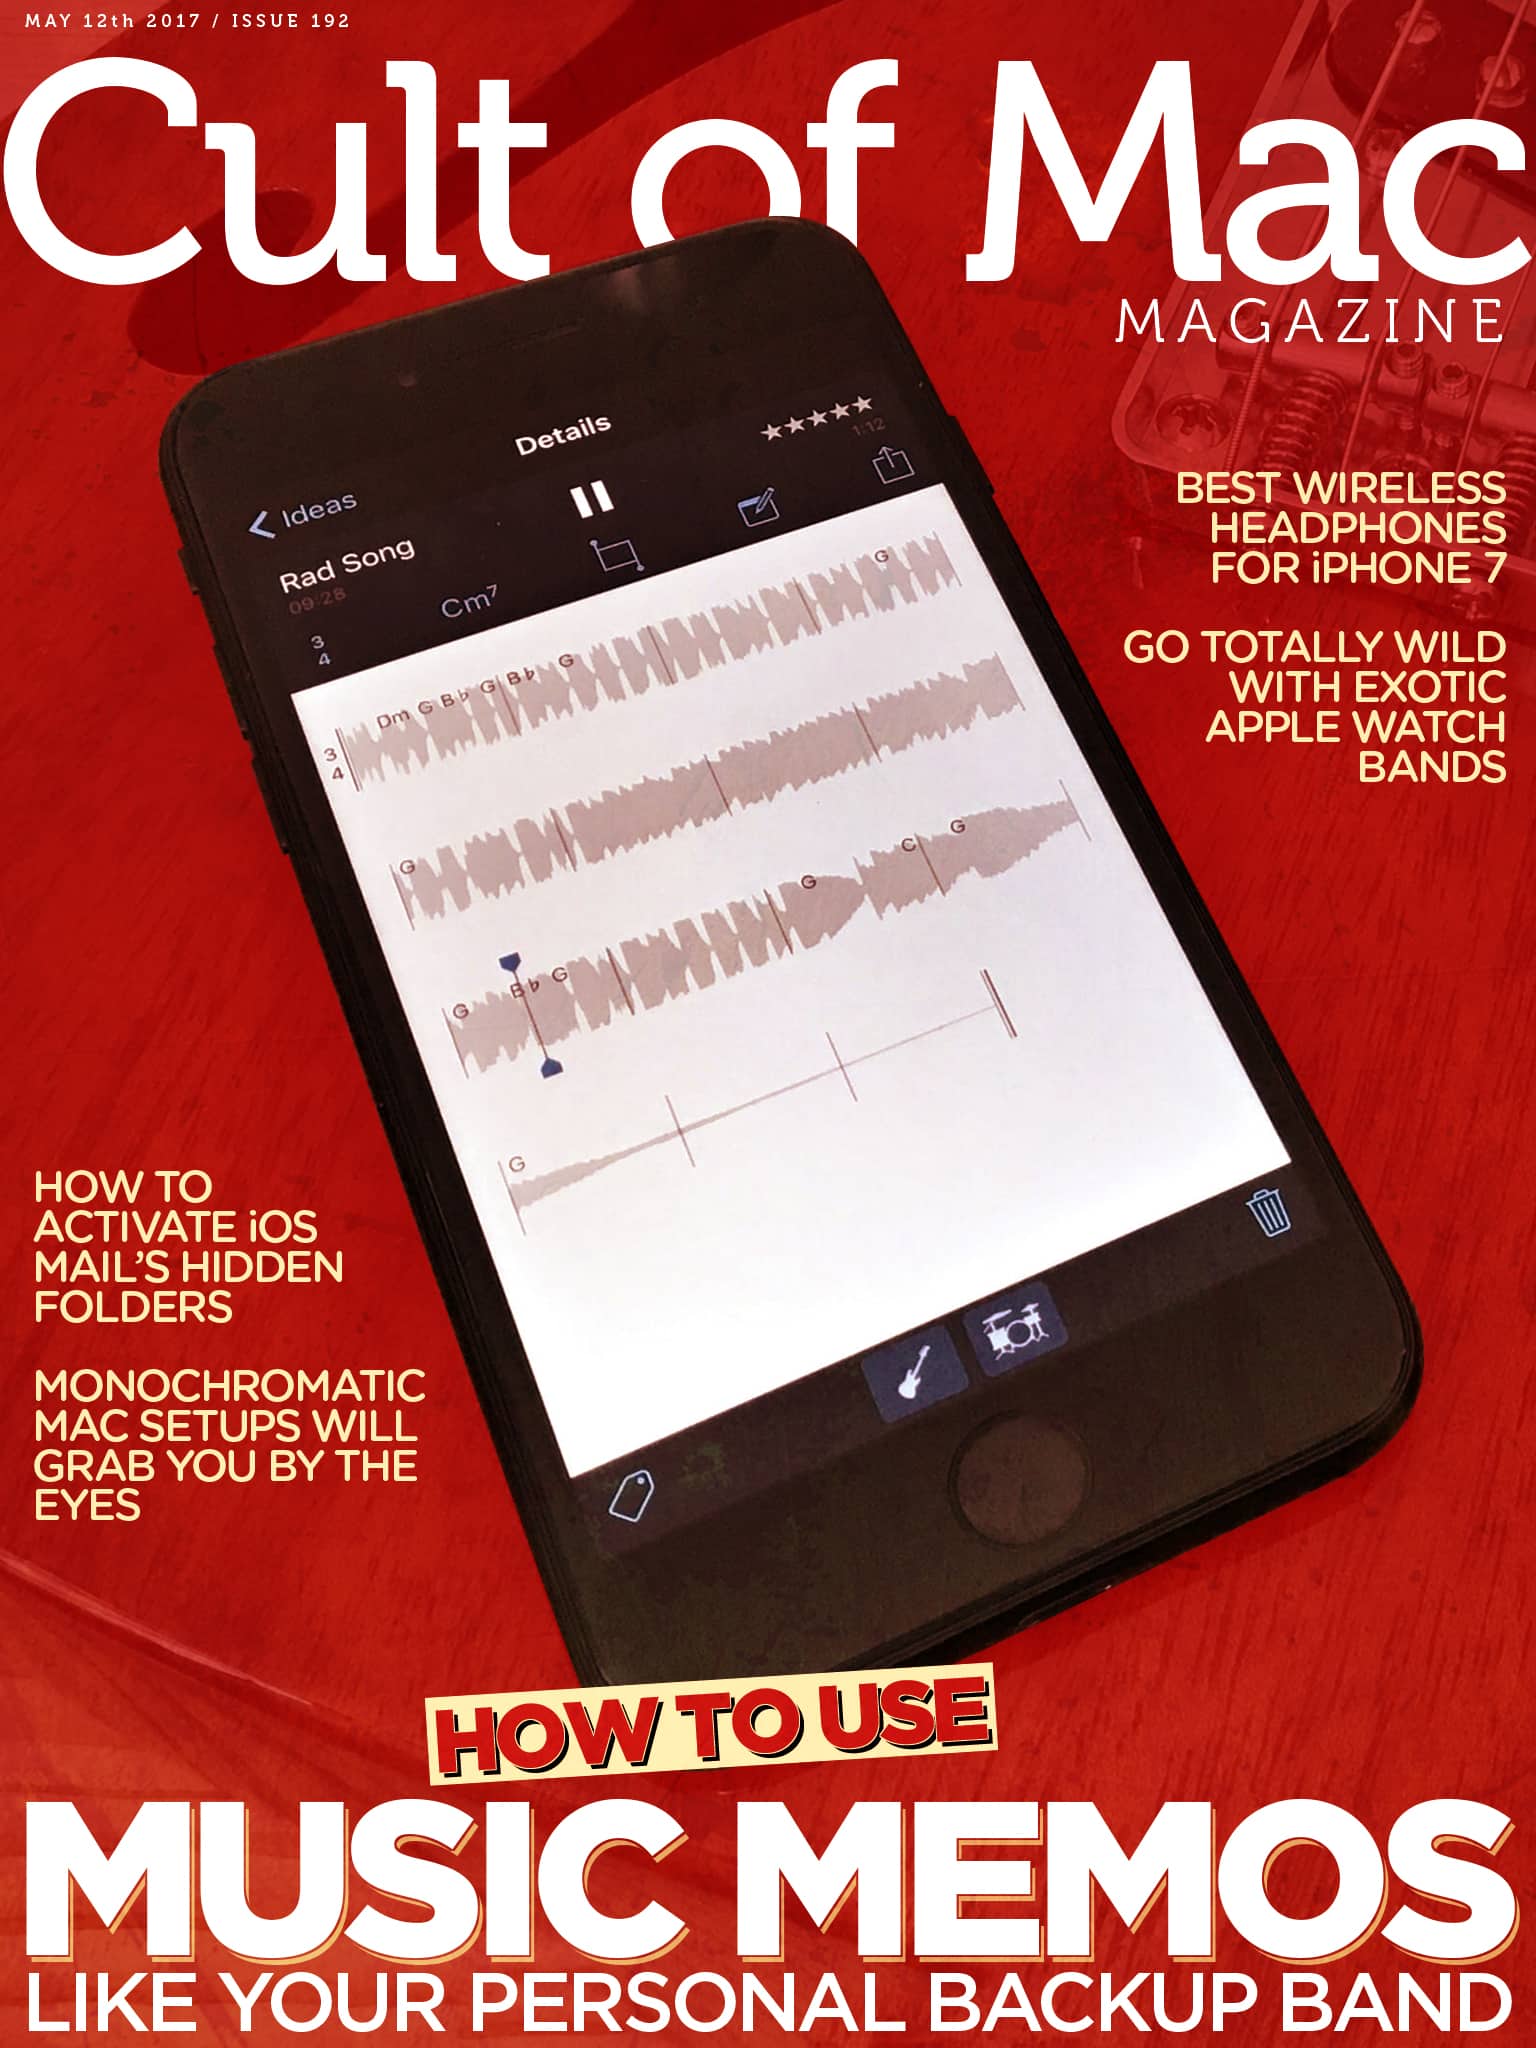 Your weekend reading is here! Check out Cult of Mac Magazine's latest issue for all the latest on Music Memos, screaming deals, monochromatic Mac setups, and more.